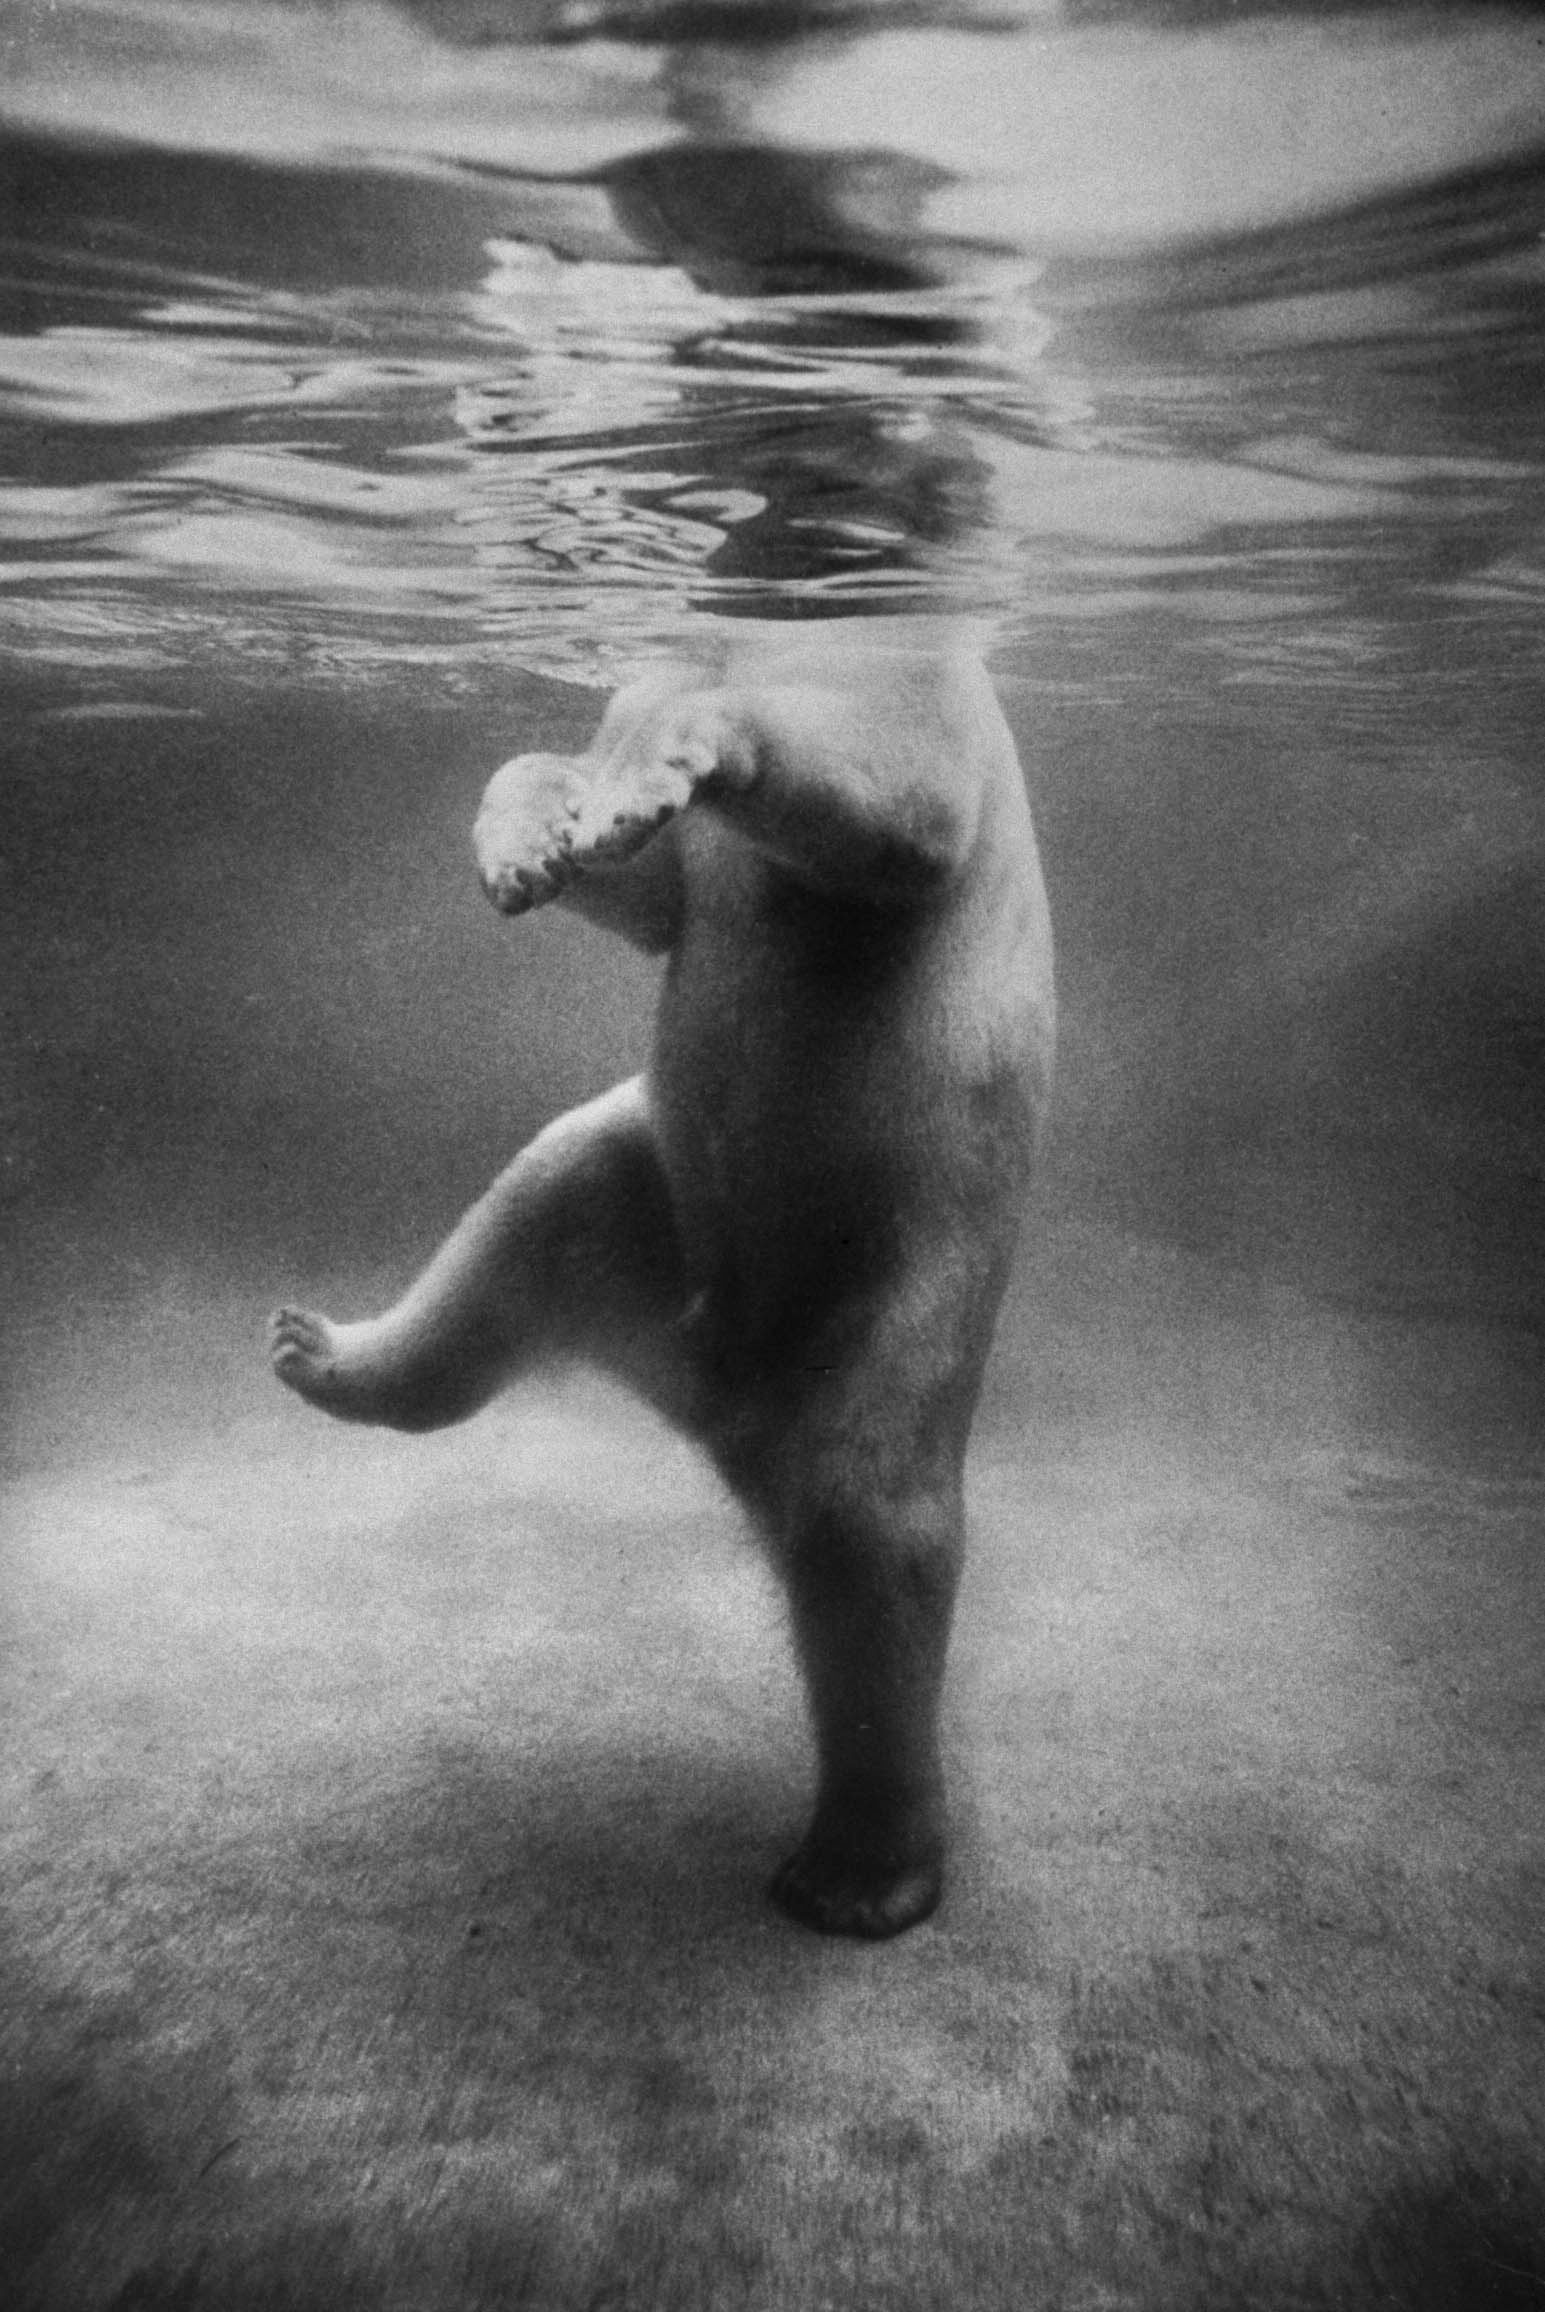 A polar bear seen underwater at a London zoo in 1967.